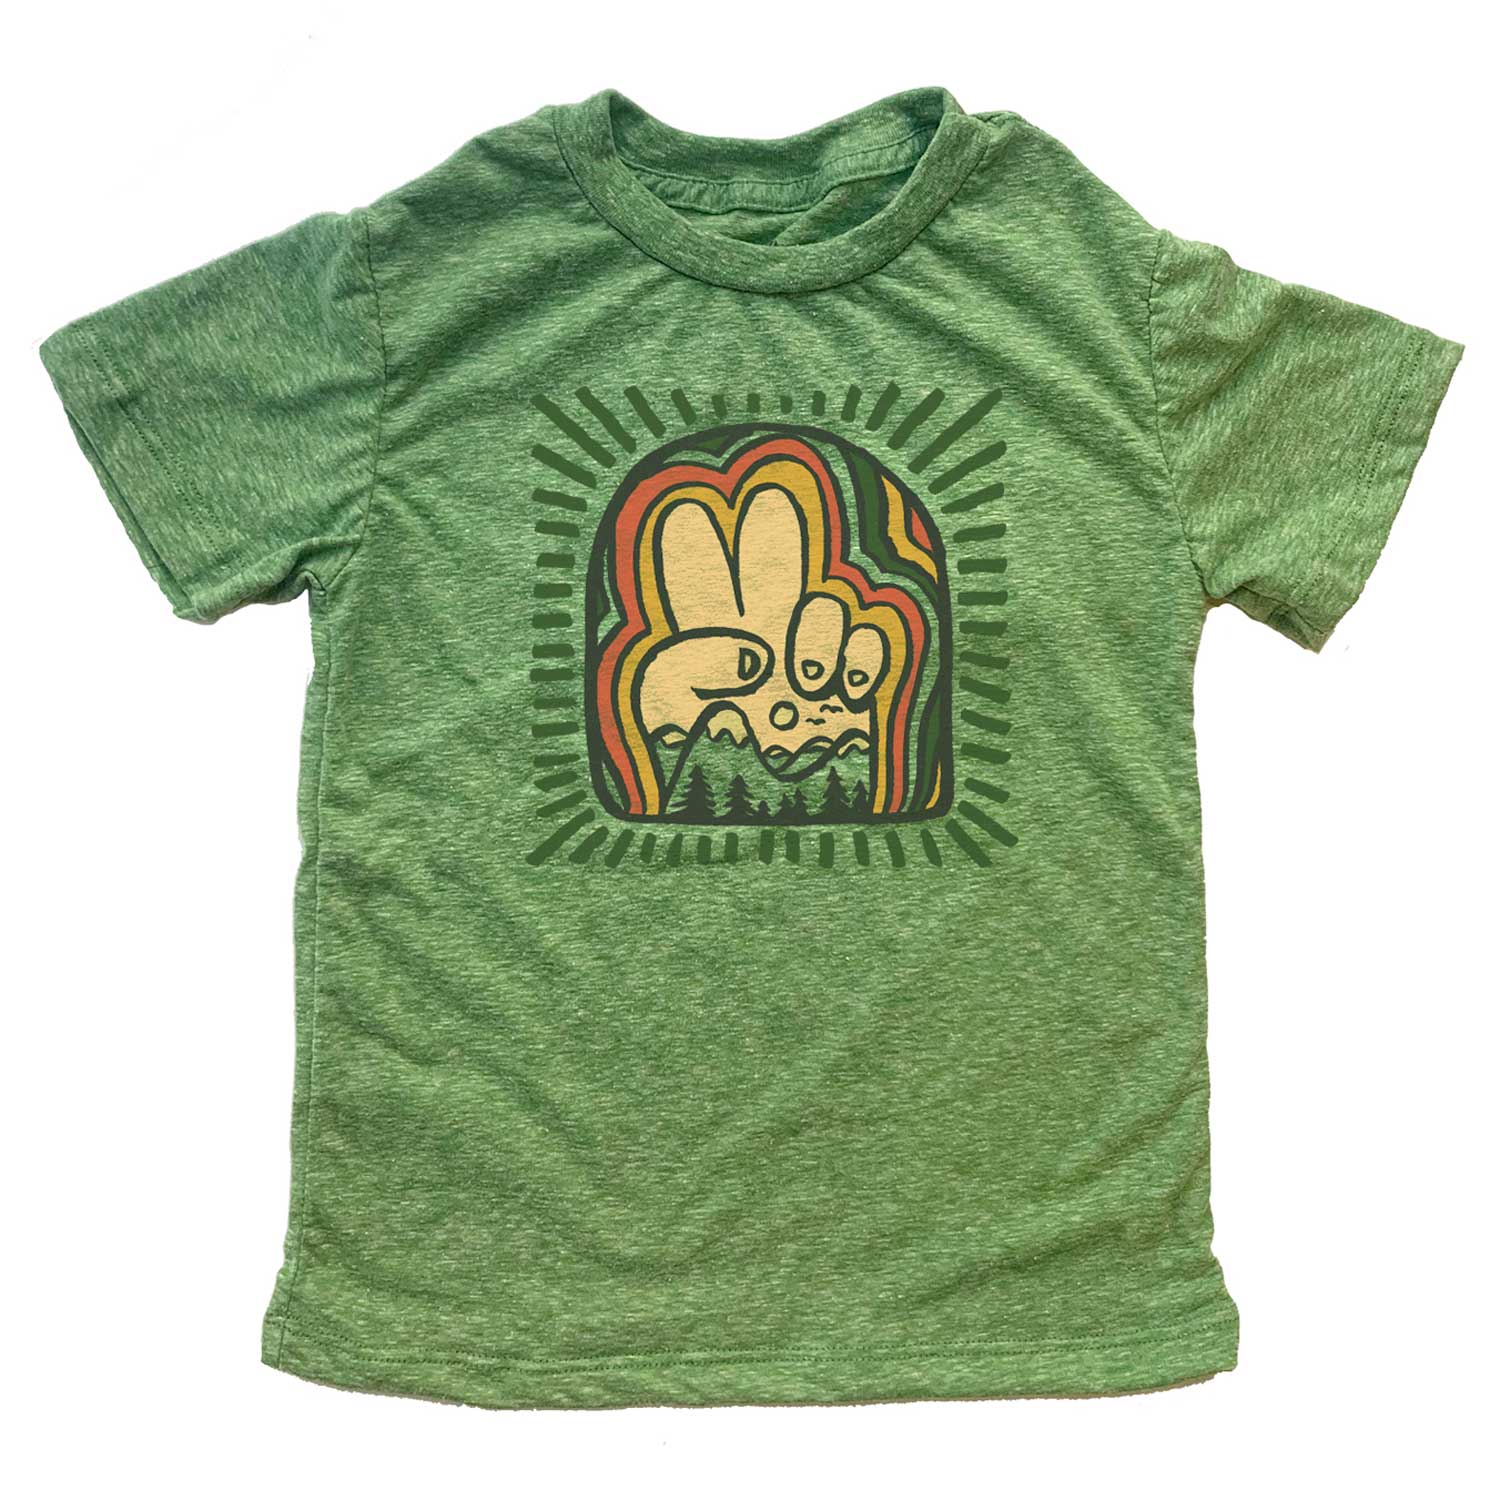 Kid Peace Mountains Artsy Nature Graphic Tee | Retro Peace Sign T-shirt for Youth | Solid Threads